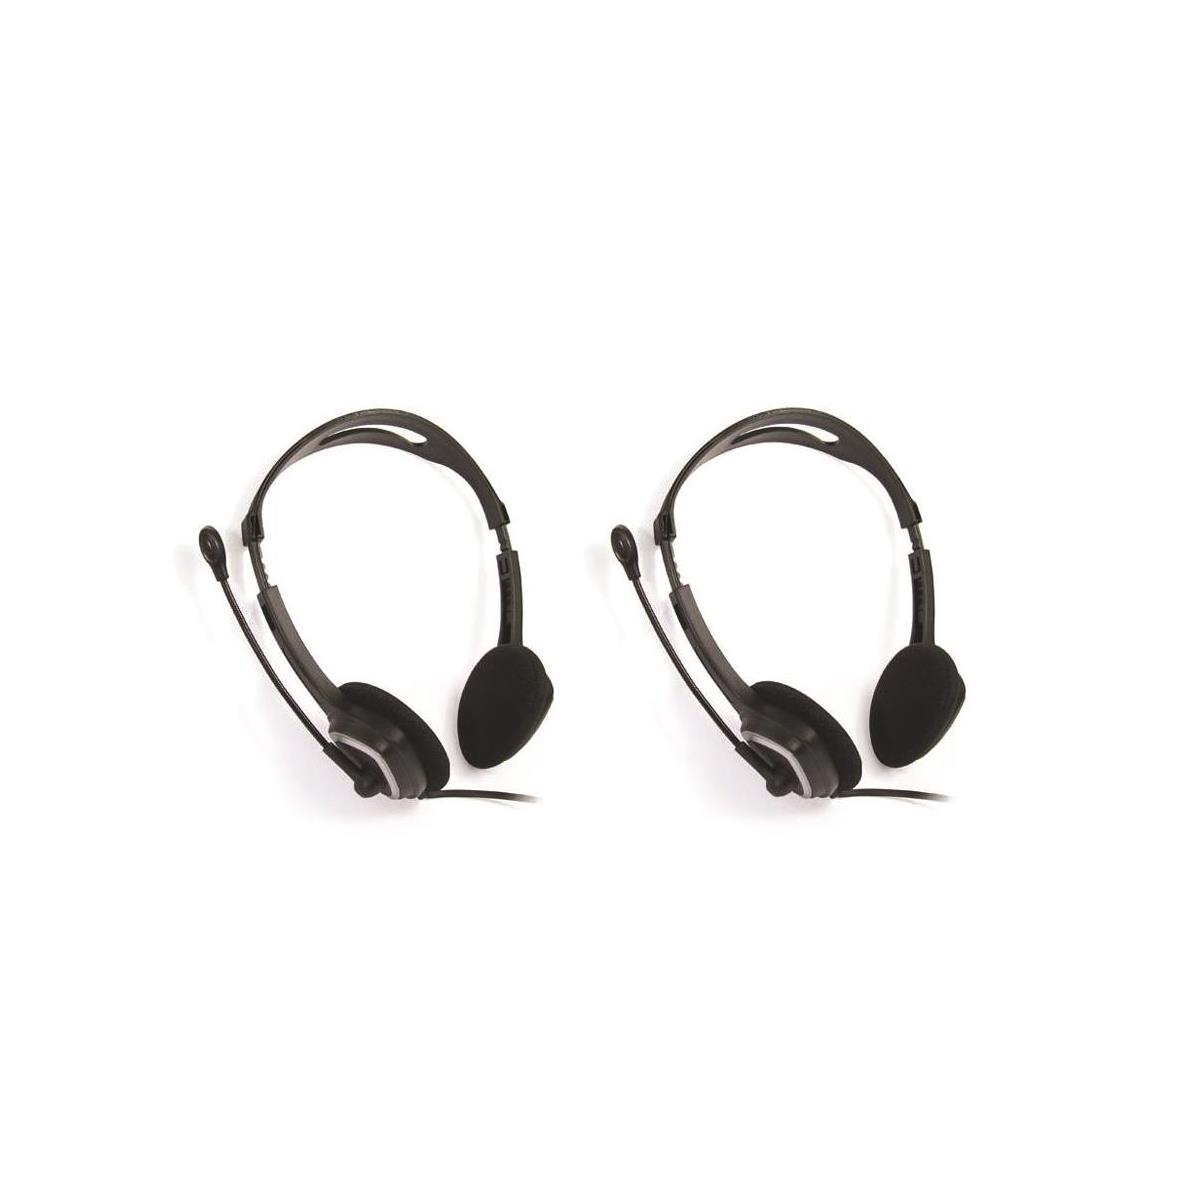 

iMicro IM320 USB Headset with Microphone, 2-Pack